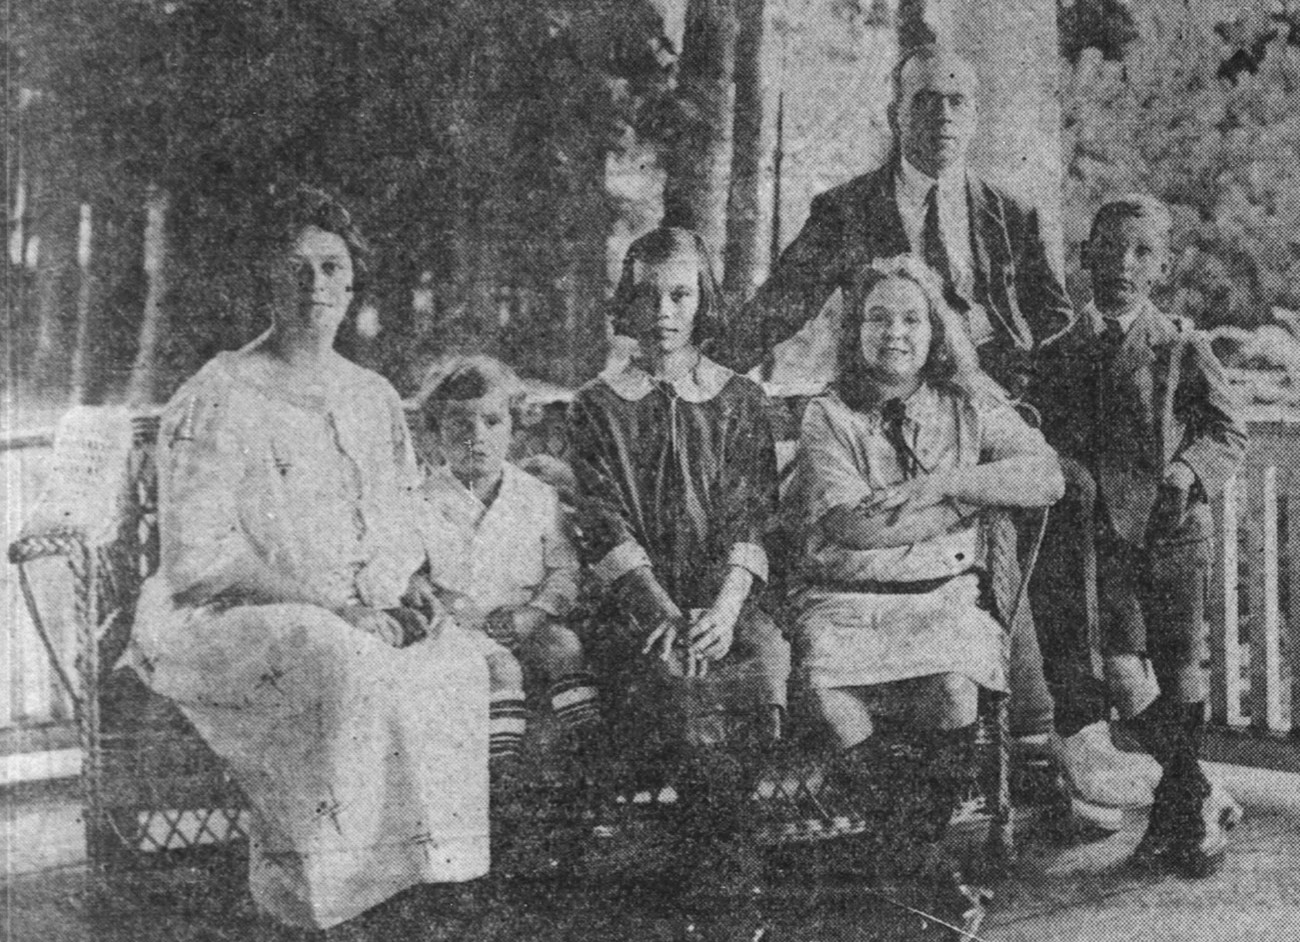 Parents and four children pose for a photograph